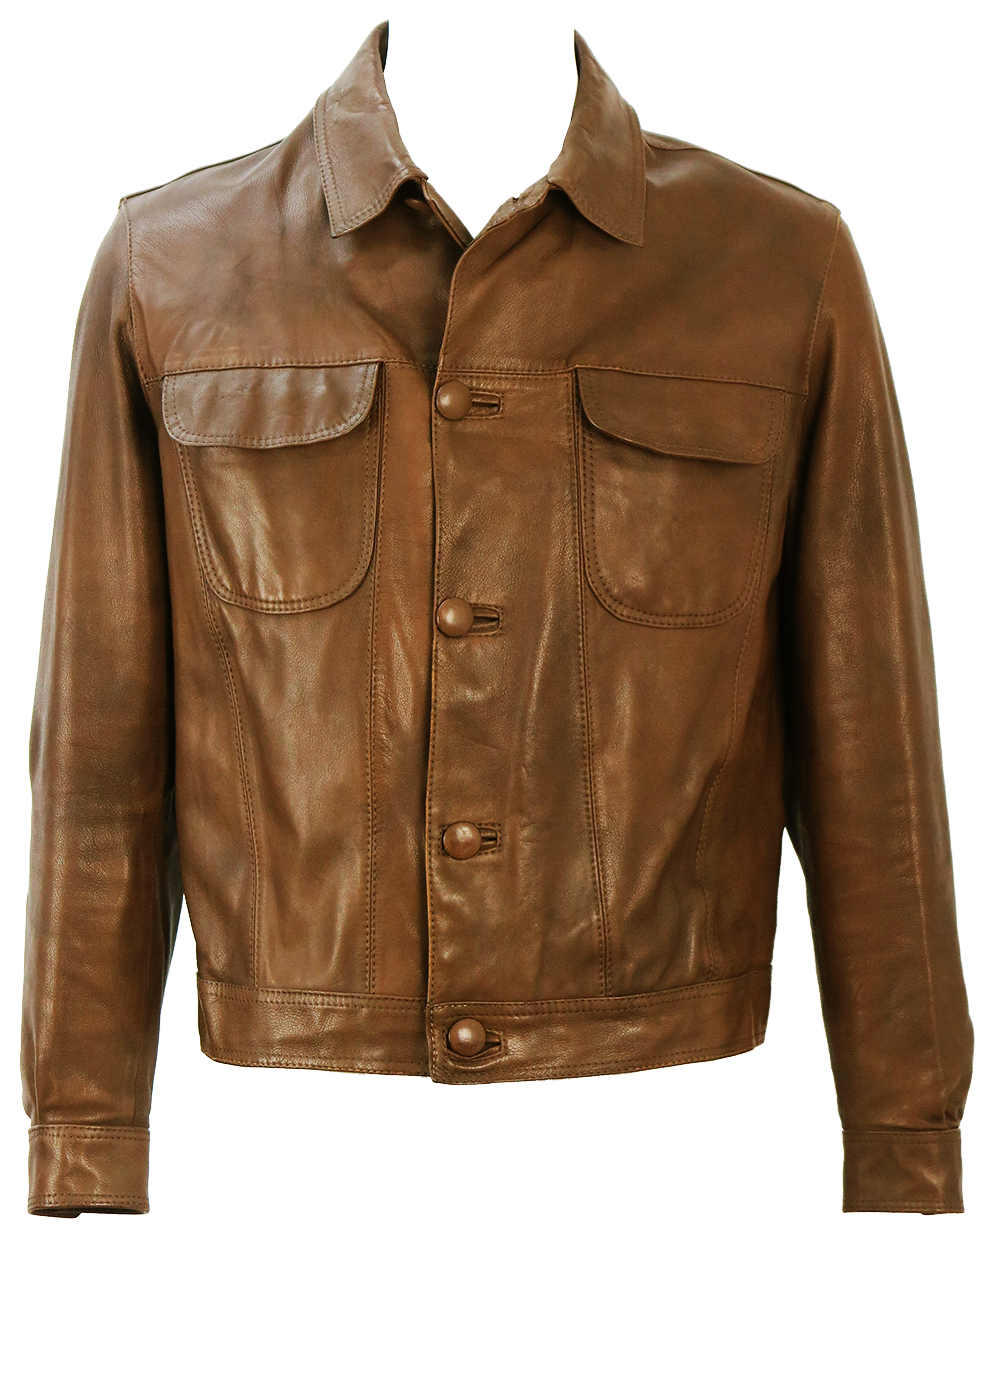 Vintage 60's Brown Leather Jacket with Patch Pockets M Reign Vintage